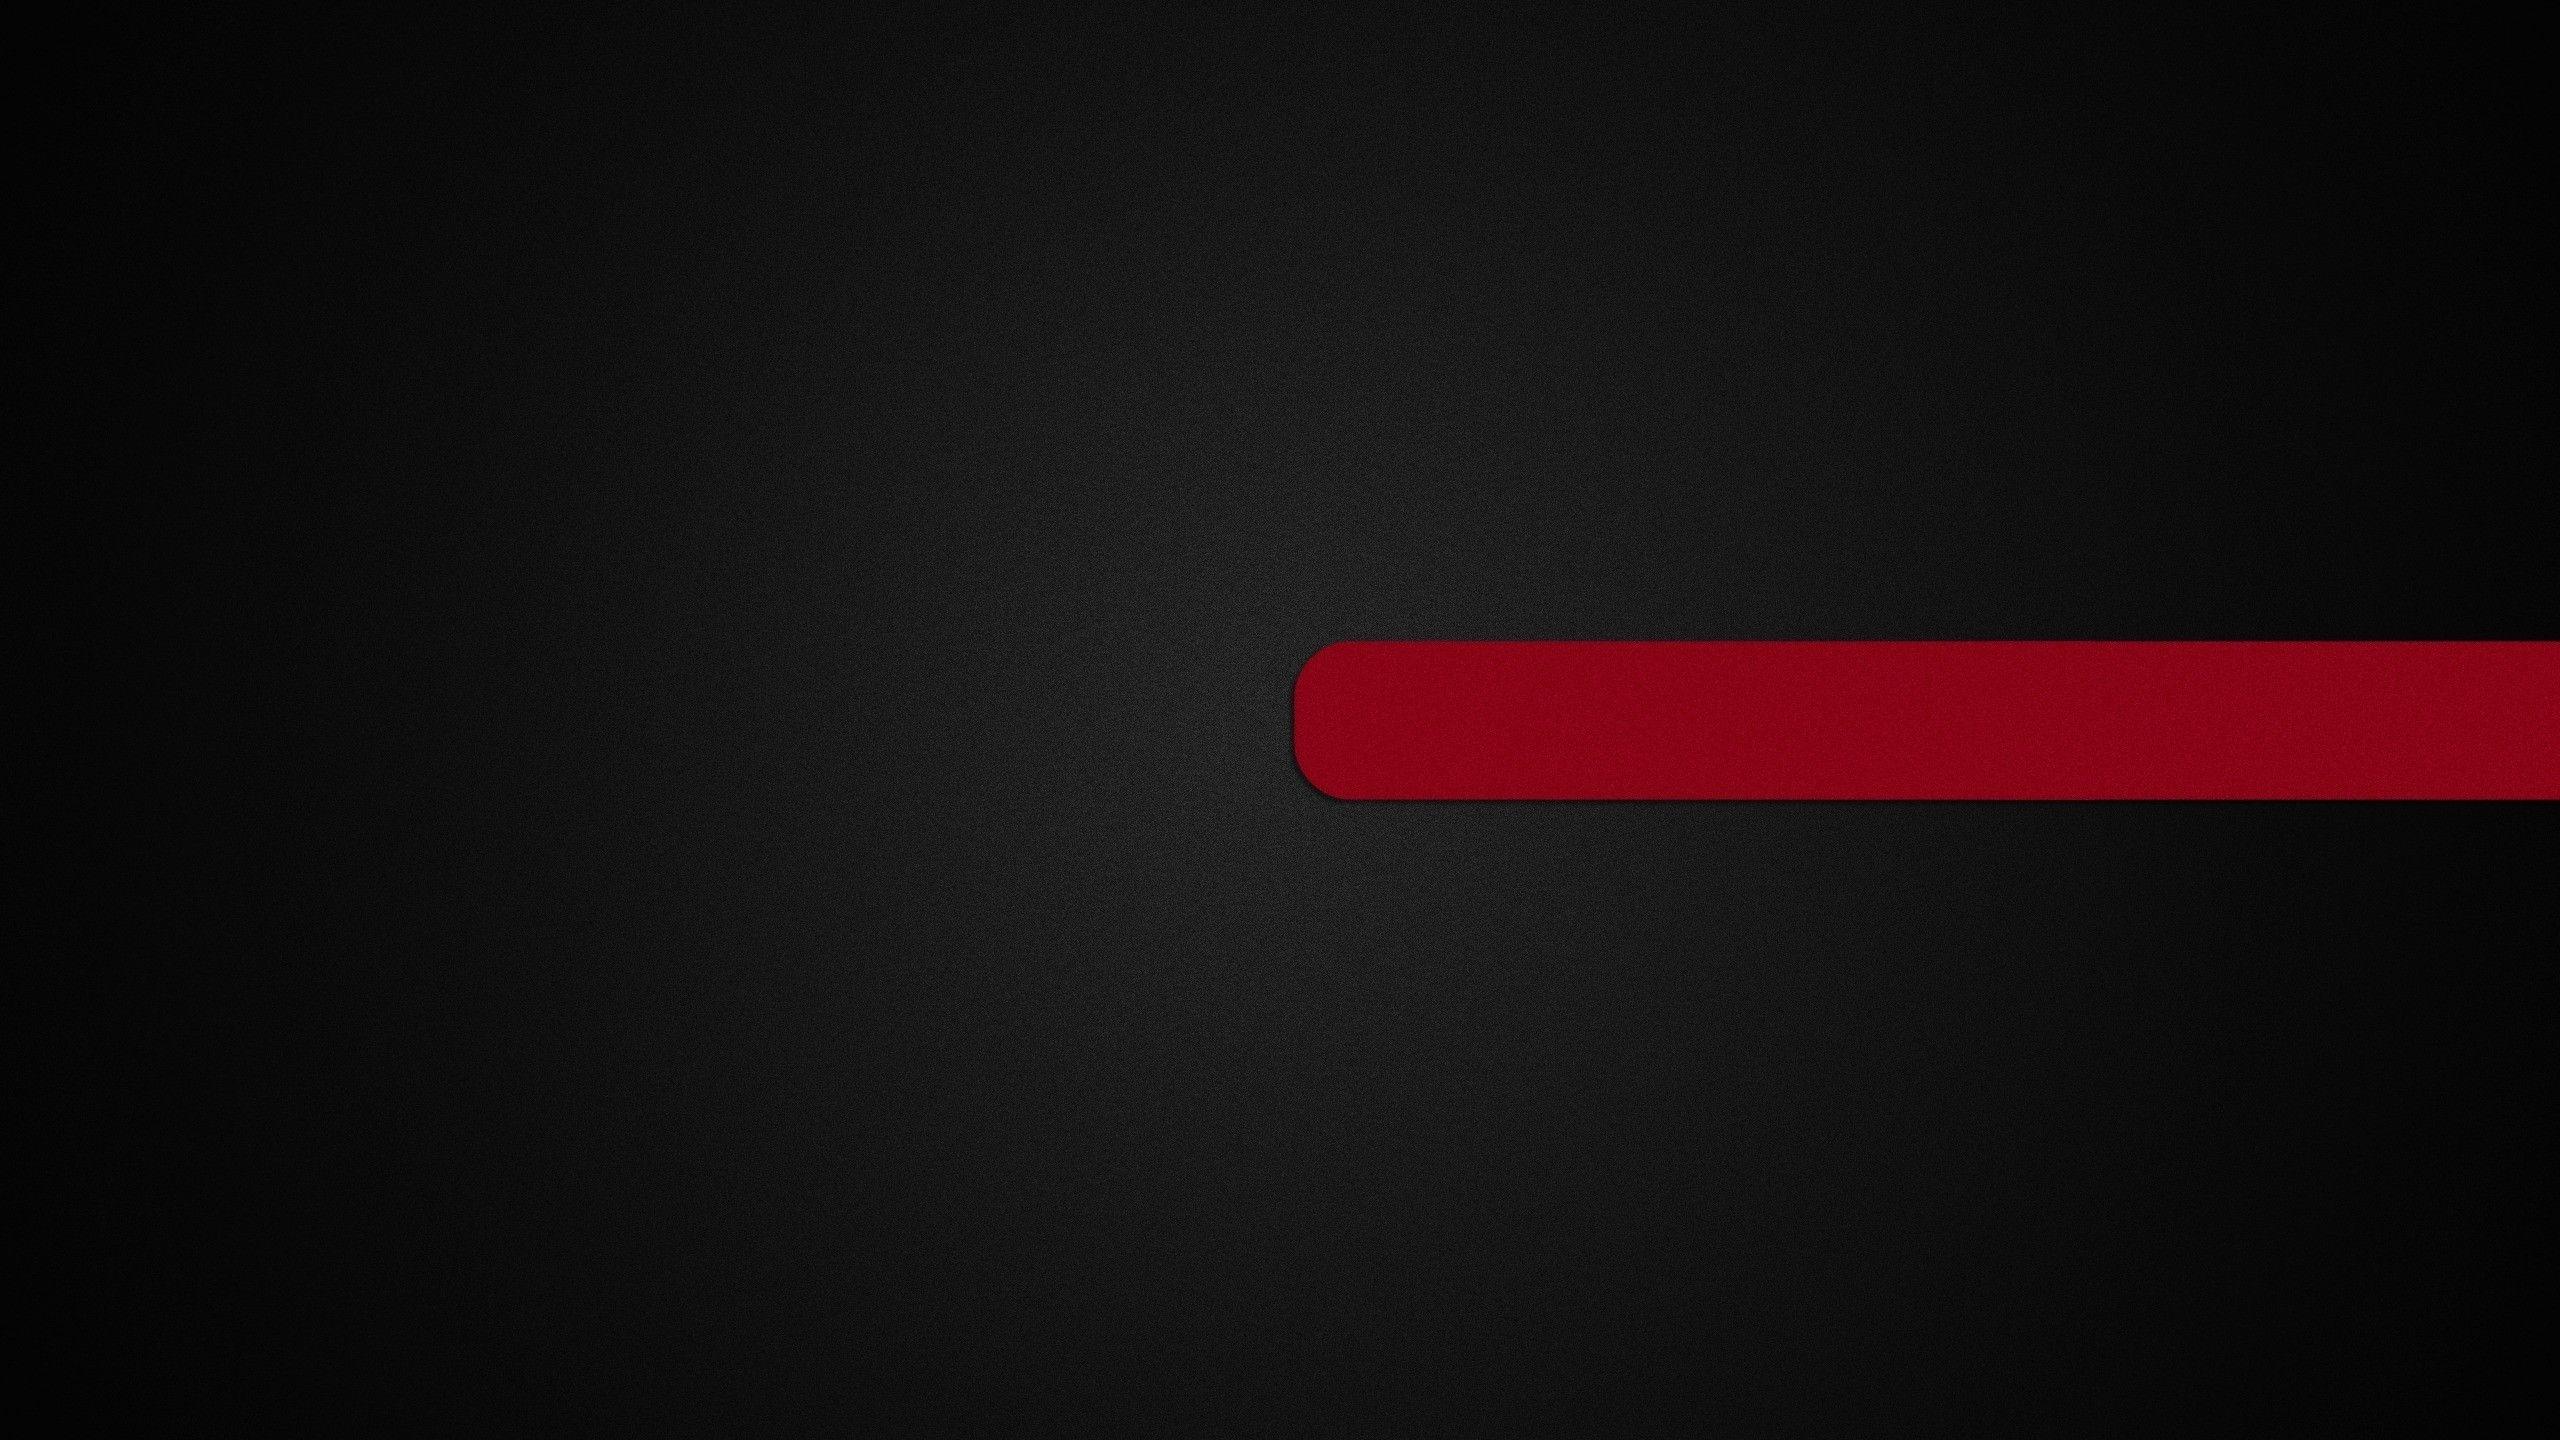 HD Black And Red Iphone Wallpaper